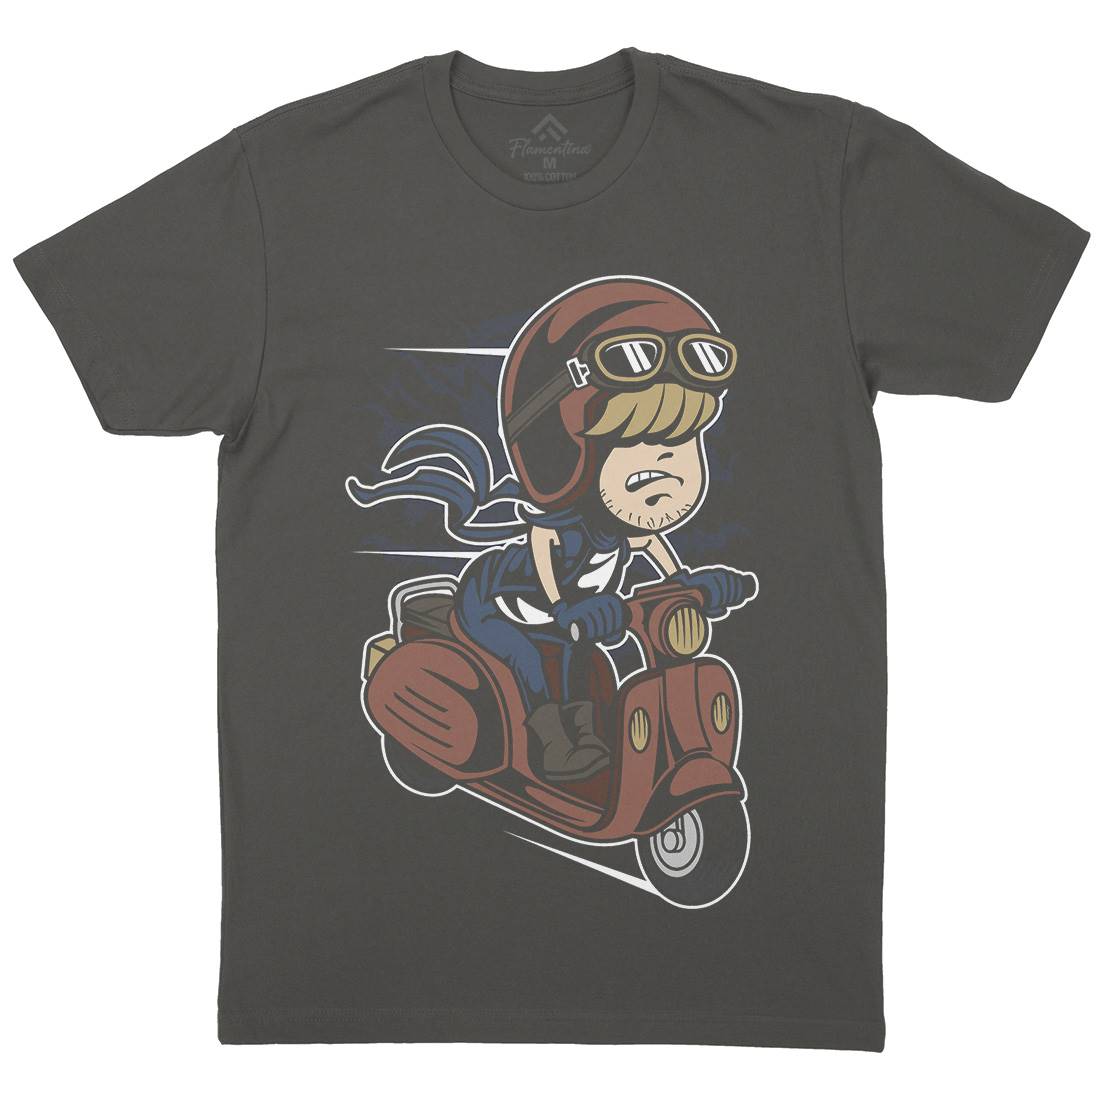 Scooter Rider Kid Mens Crew Neck T-Shirt Motorcycles C436